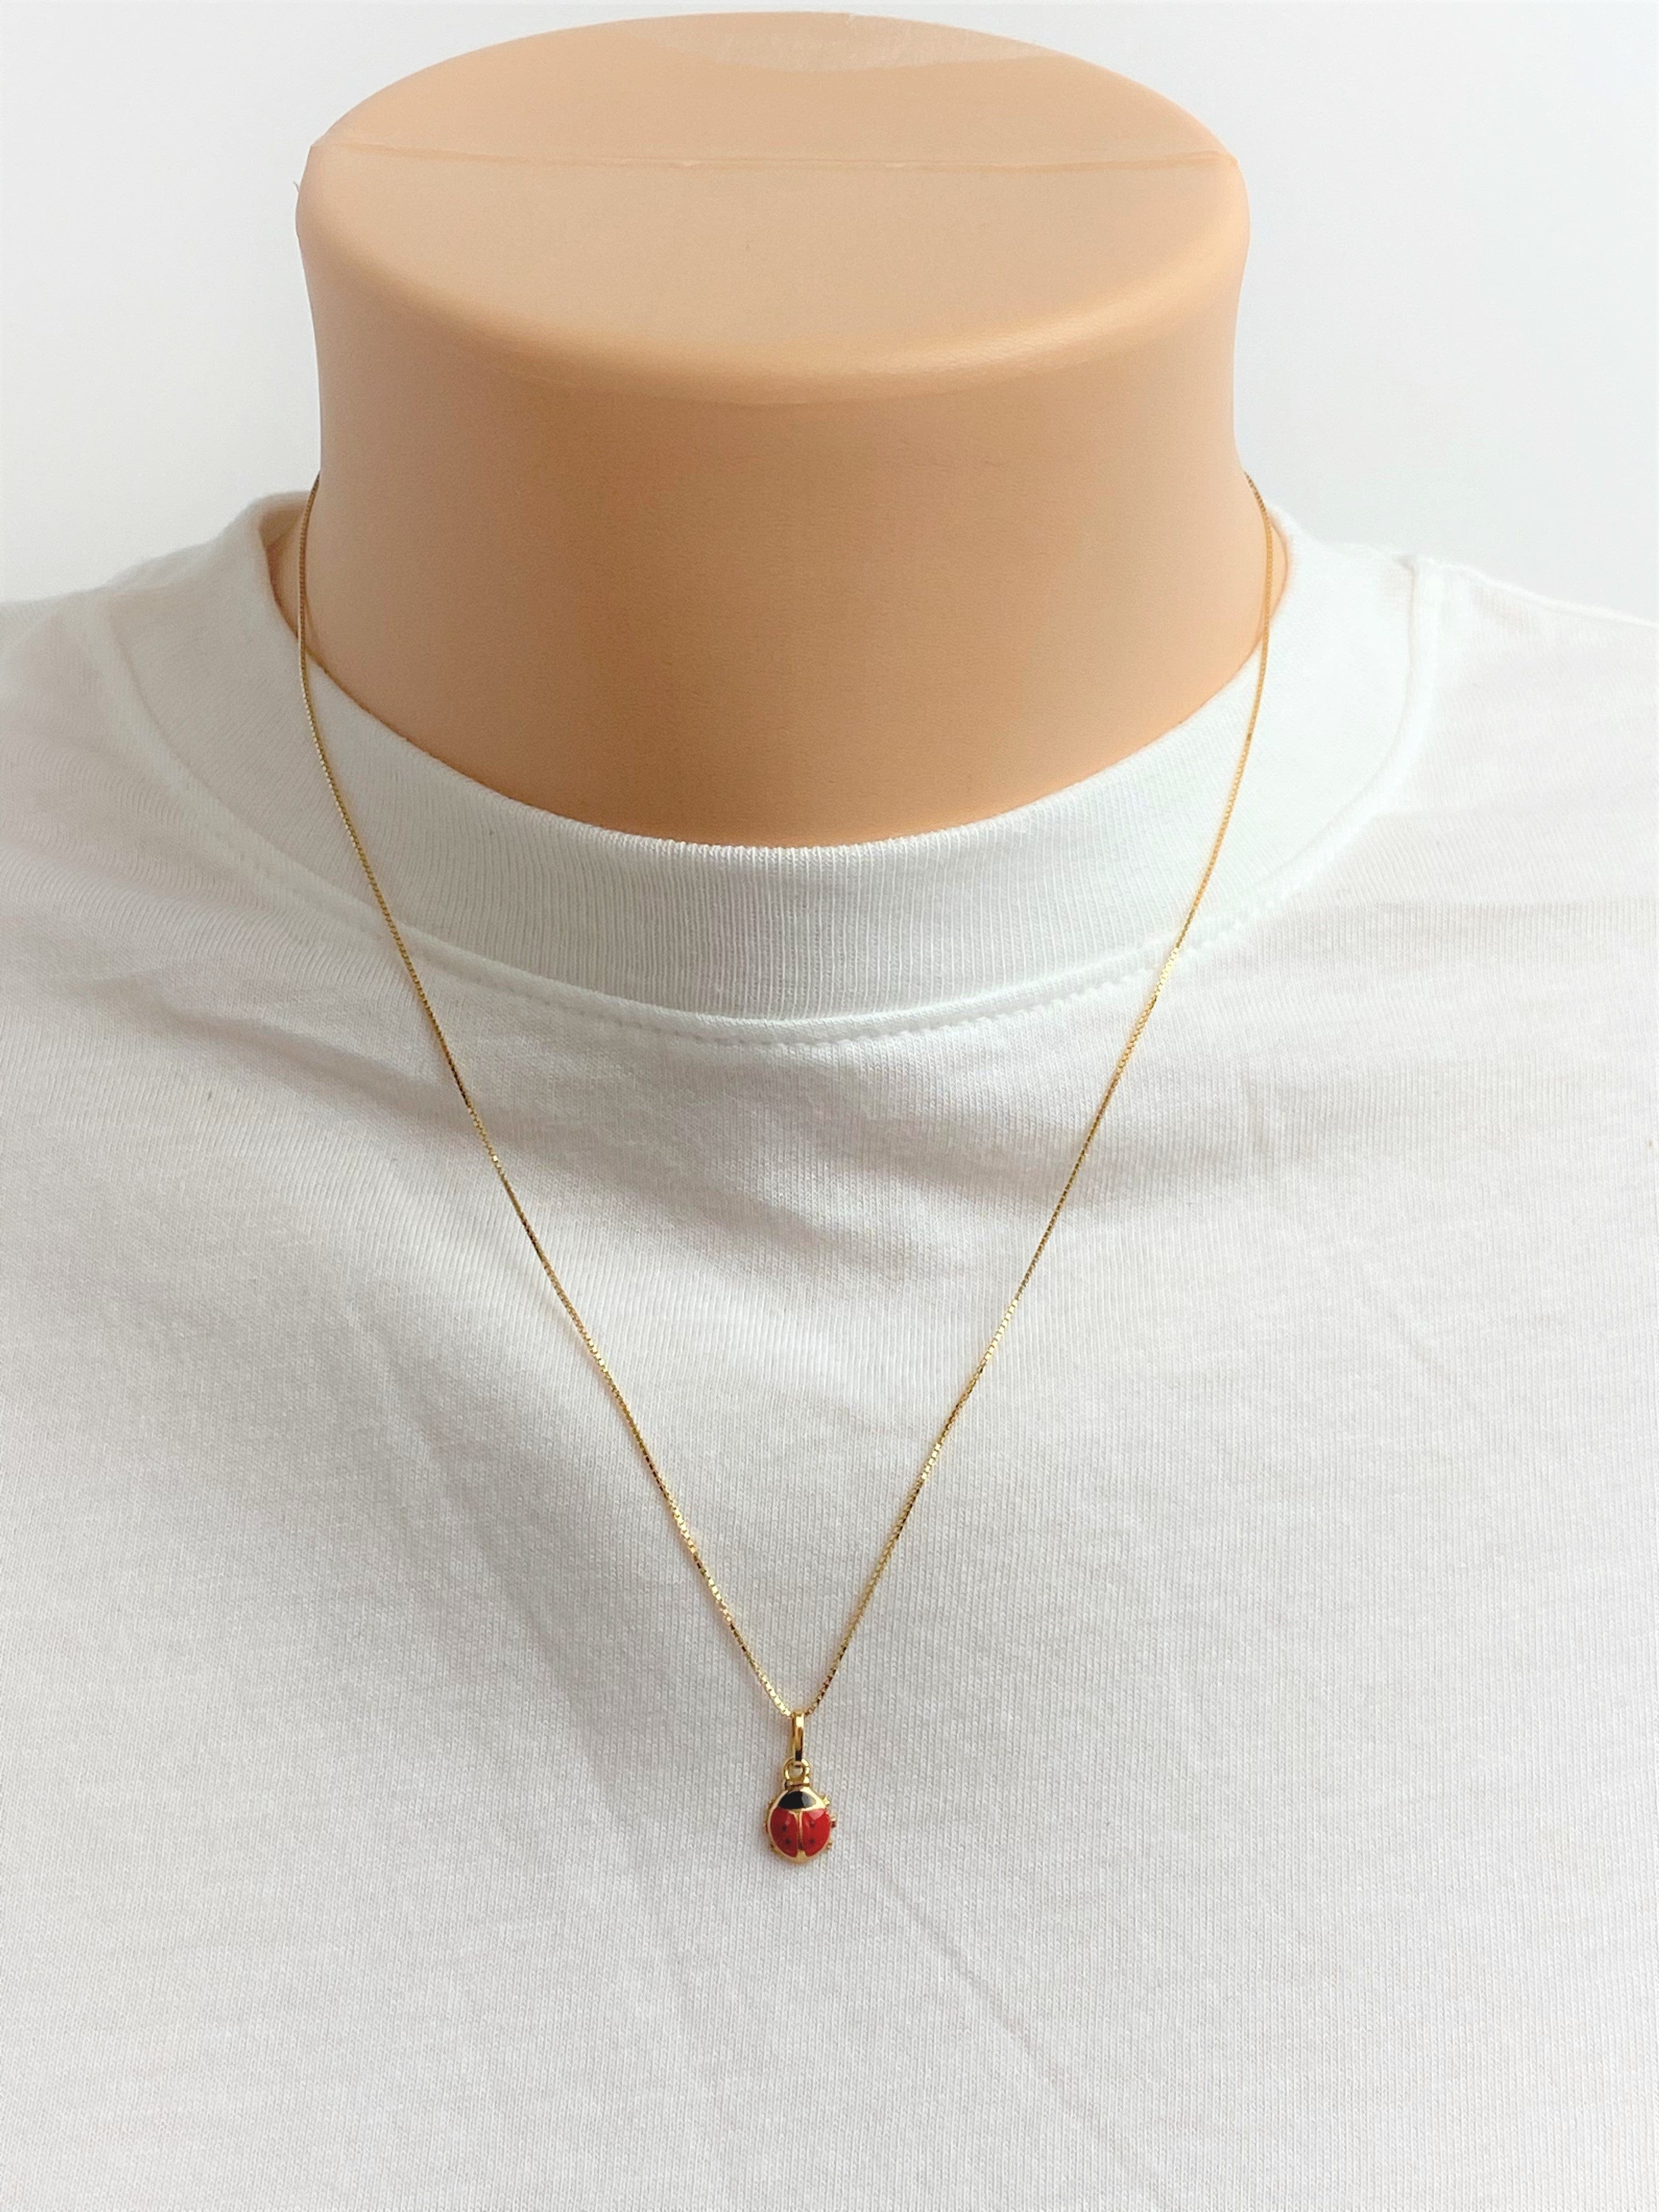 Gold Ladybug Necklace Ladybug Necklace Ladybug Jewelry Insect Necklace  Insect Jewelry - Etsy